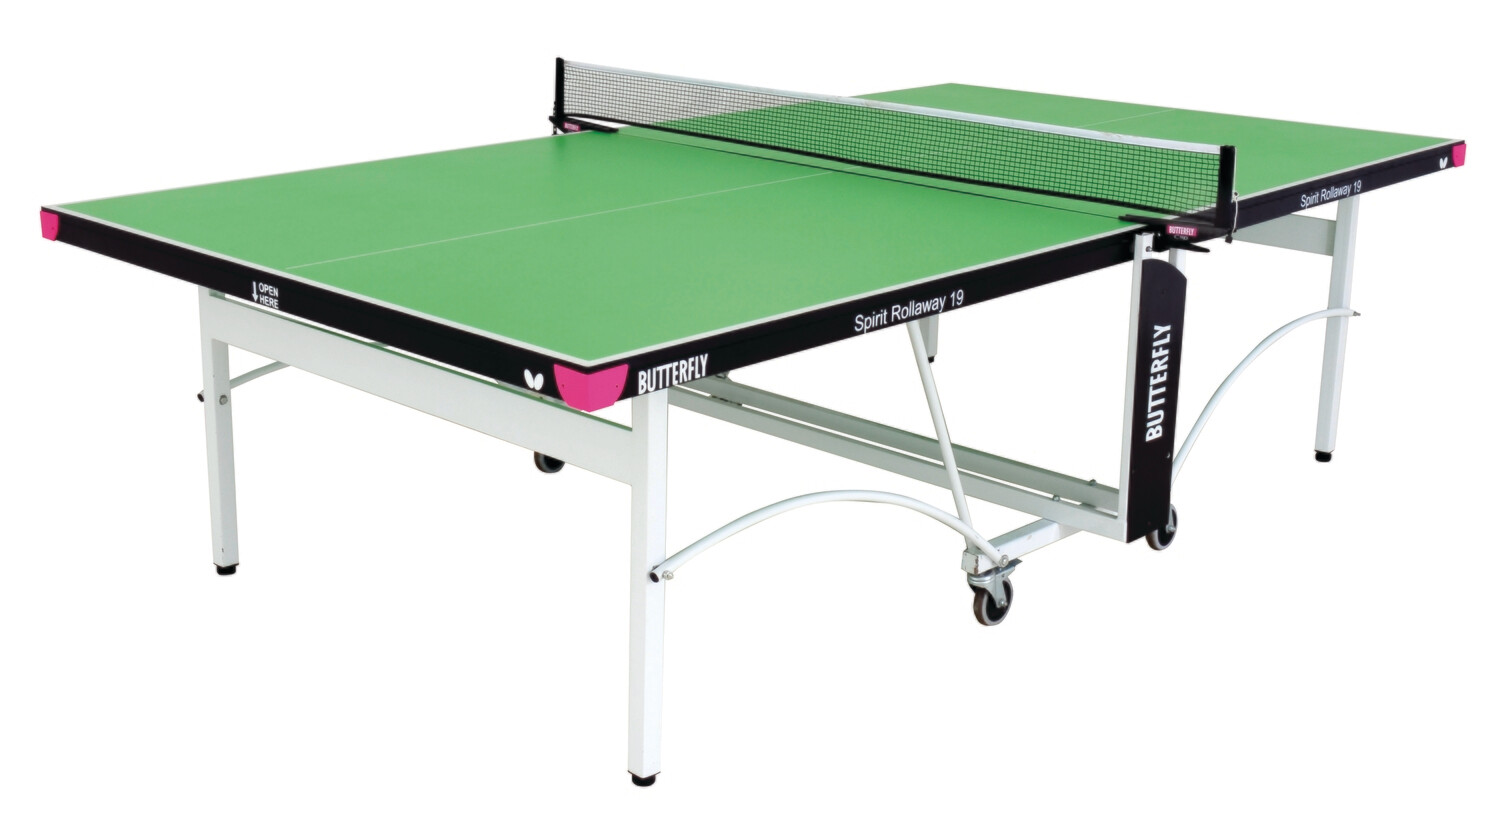 Butterfly Spirit 19 Indoor Rollaway Table Tennis Table, Colour: Green